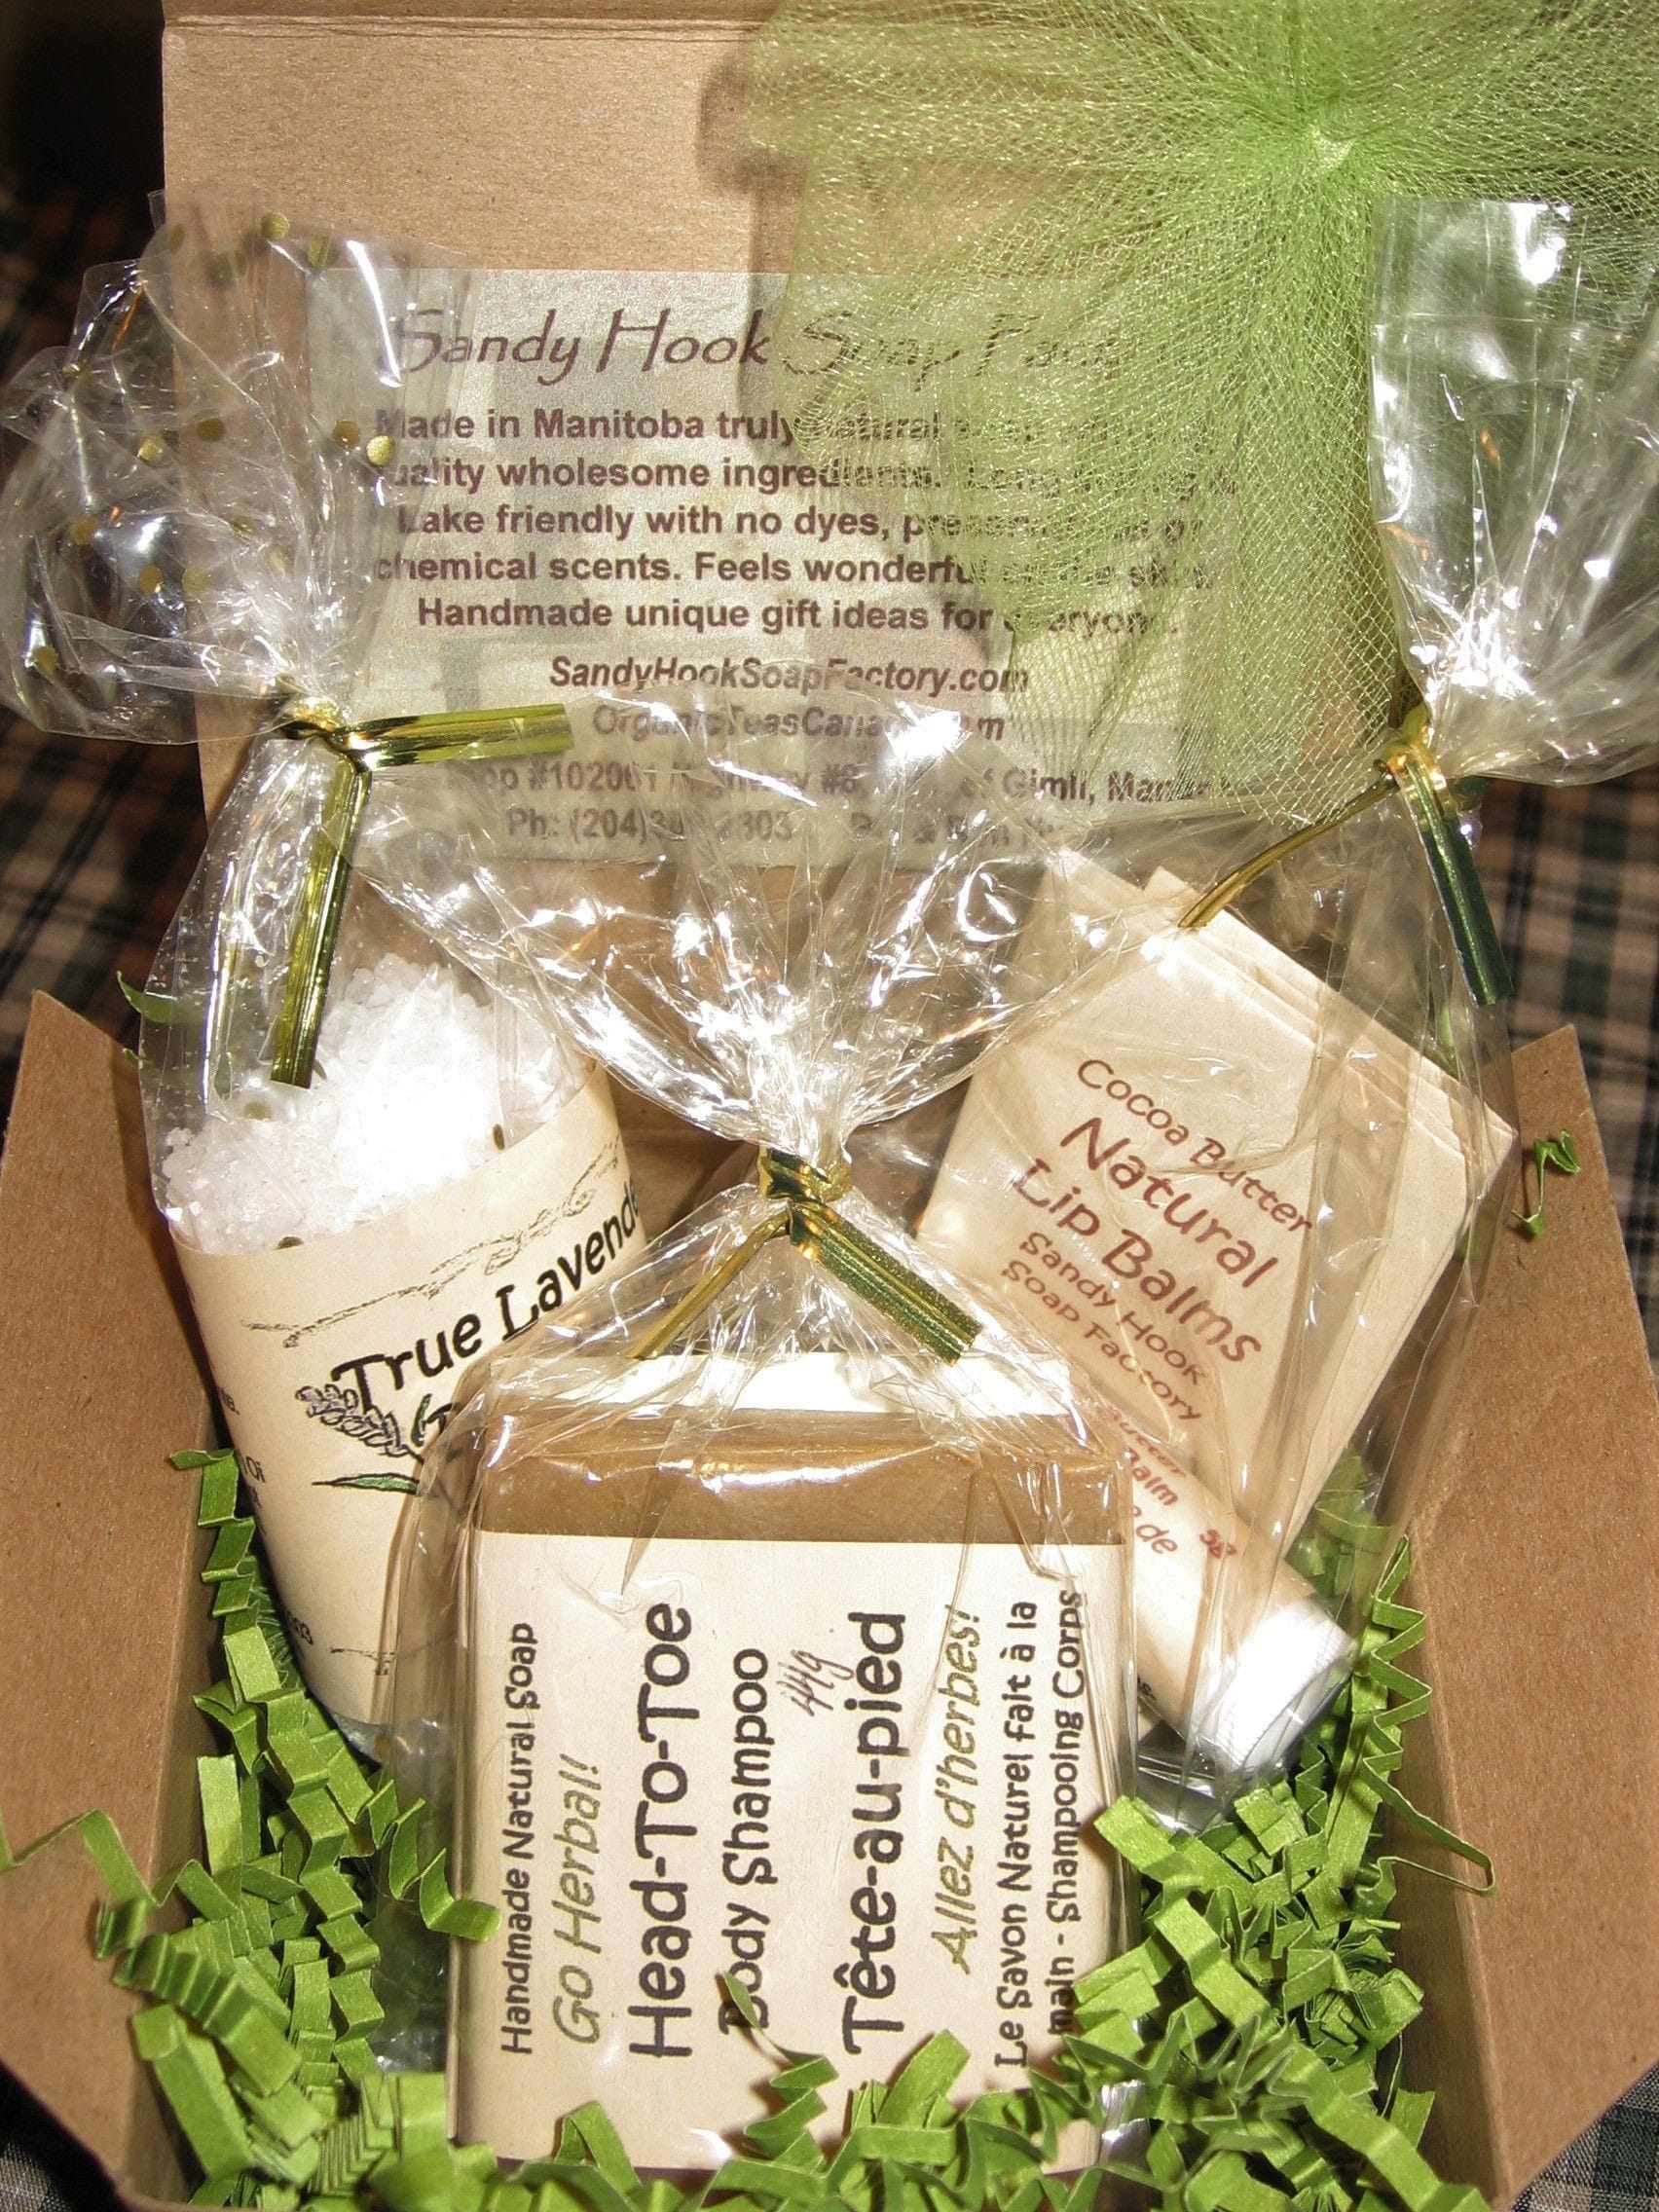 Handmade in Canada soap gifts in every price range for everyone on your gift giving list.  Locally make by us with care in Gimli Manitoba.  Great ingredients!